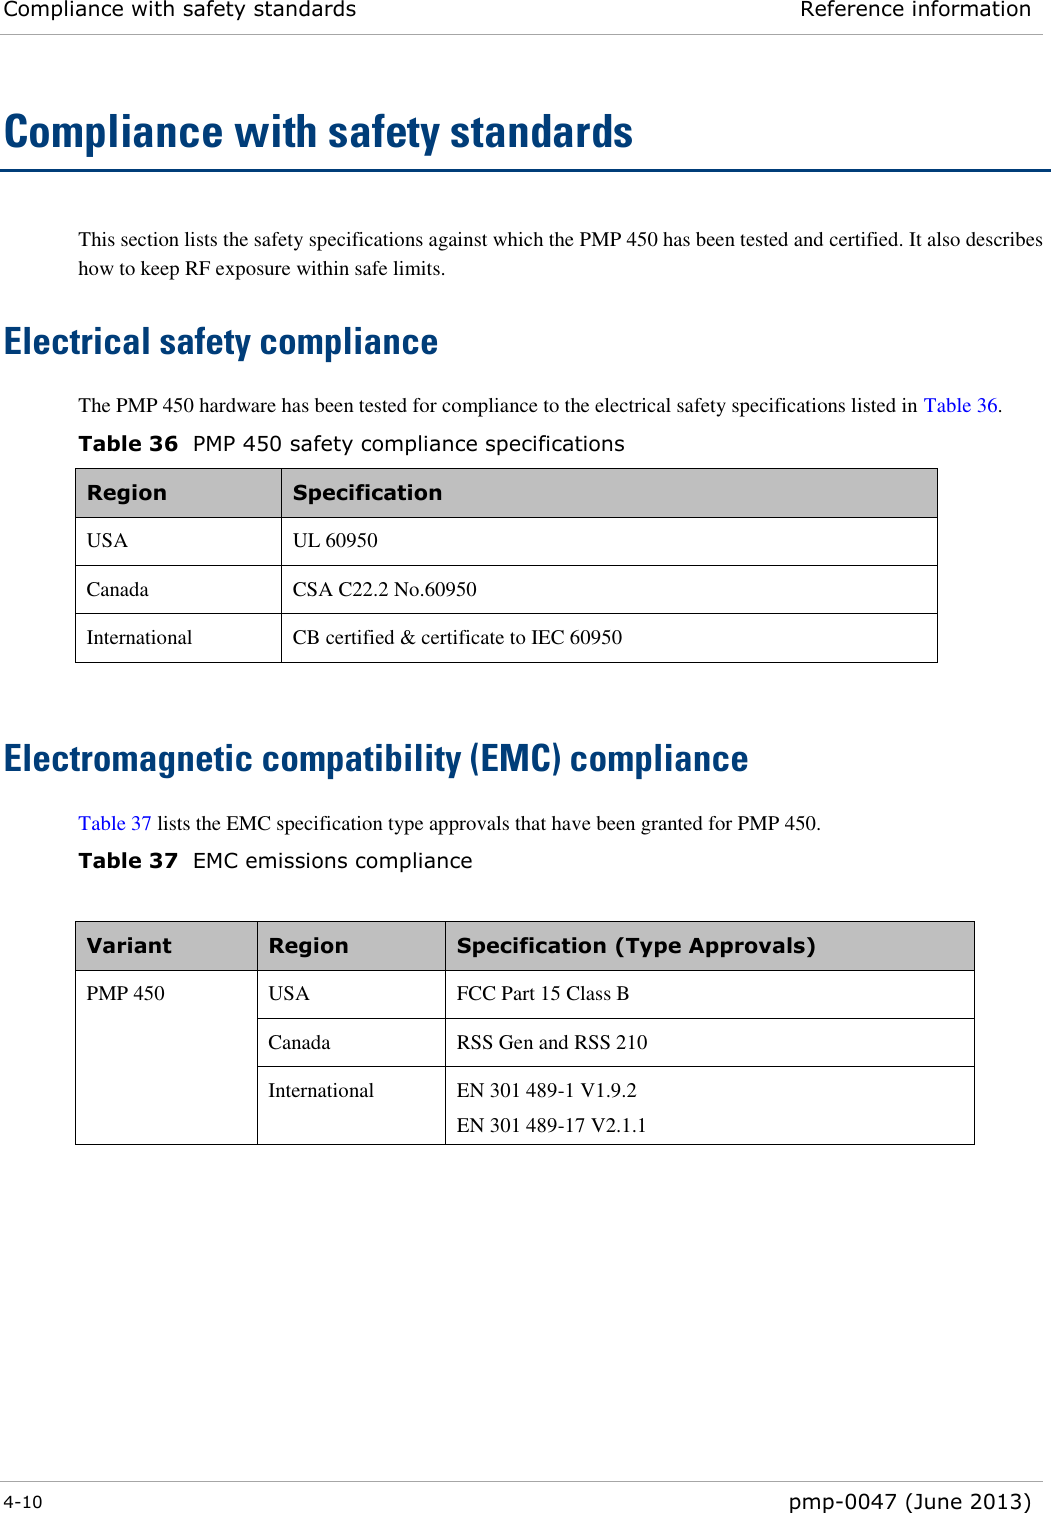 Compliance with safety standards Reference information  4-10  pmp-0047 (June 2013)  Compliance with safety standards This section lists the safety specifications against which the PMP 450 has been tested and certified. It also describes how to keep RF exposure within safe limits. Electrical safety compliance  The PMP 450 hardware has been tested for compliance to the electrical safety specifications listed in Table 36. Table 36  PMP 450 safety compliance specifications Region Specification USA UL 60950 Canada CSA C22.2 No.60950 International CB certified &amp; certificate to IEC 60950  Electromagnetic compatibility (EMC) compliance Table 37 lists the EMC specification type approvals that have been granted for PMP 450. Table 37  EMC emissions compliance  Variant Region Specification (Type Approvals) PMP 450 USA FCC Part 15 Class B Canada RSS Gen and RSS 210 International EN 301 489-1 V1.9.2 EN 301 489-17 V2.1.1   